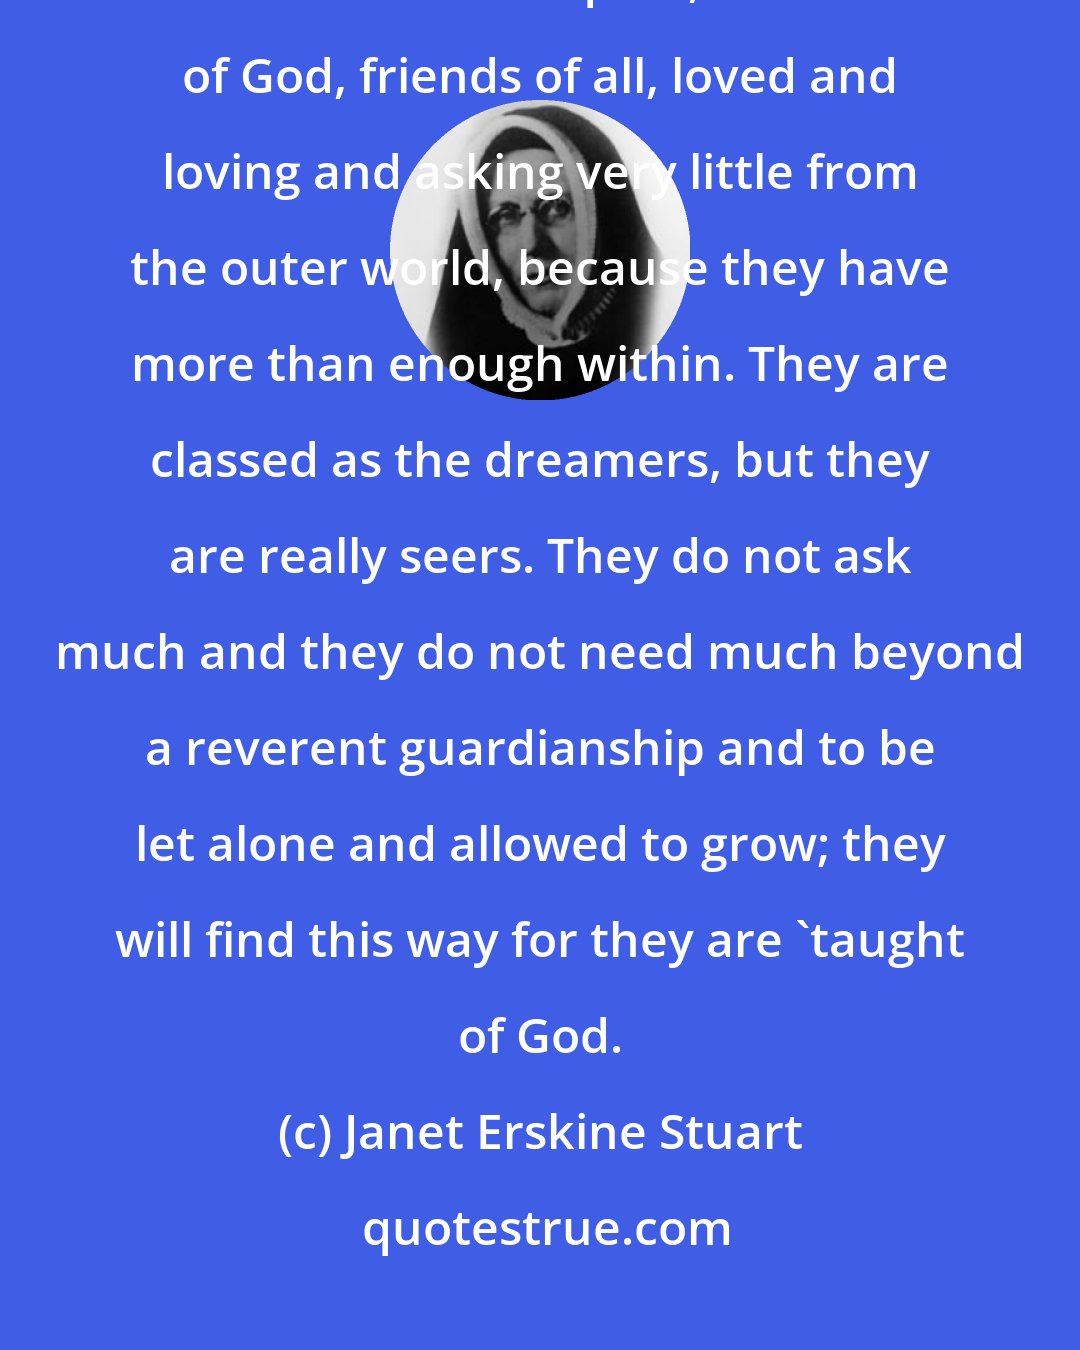 Janet Erskine Stuart: Children with heaven in their eyes and an air of mystery about them, meditative and quiet, friends of God, friends of all, loved and loving and asking very little from the outer world, because they have more than enough within. They are classed as the dreamers, but they are really seers. They do not ask much and they do not need much beyond a reverent guardianship and to be let alone and allowed to grow; they will find this way for they are 'taught of God.